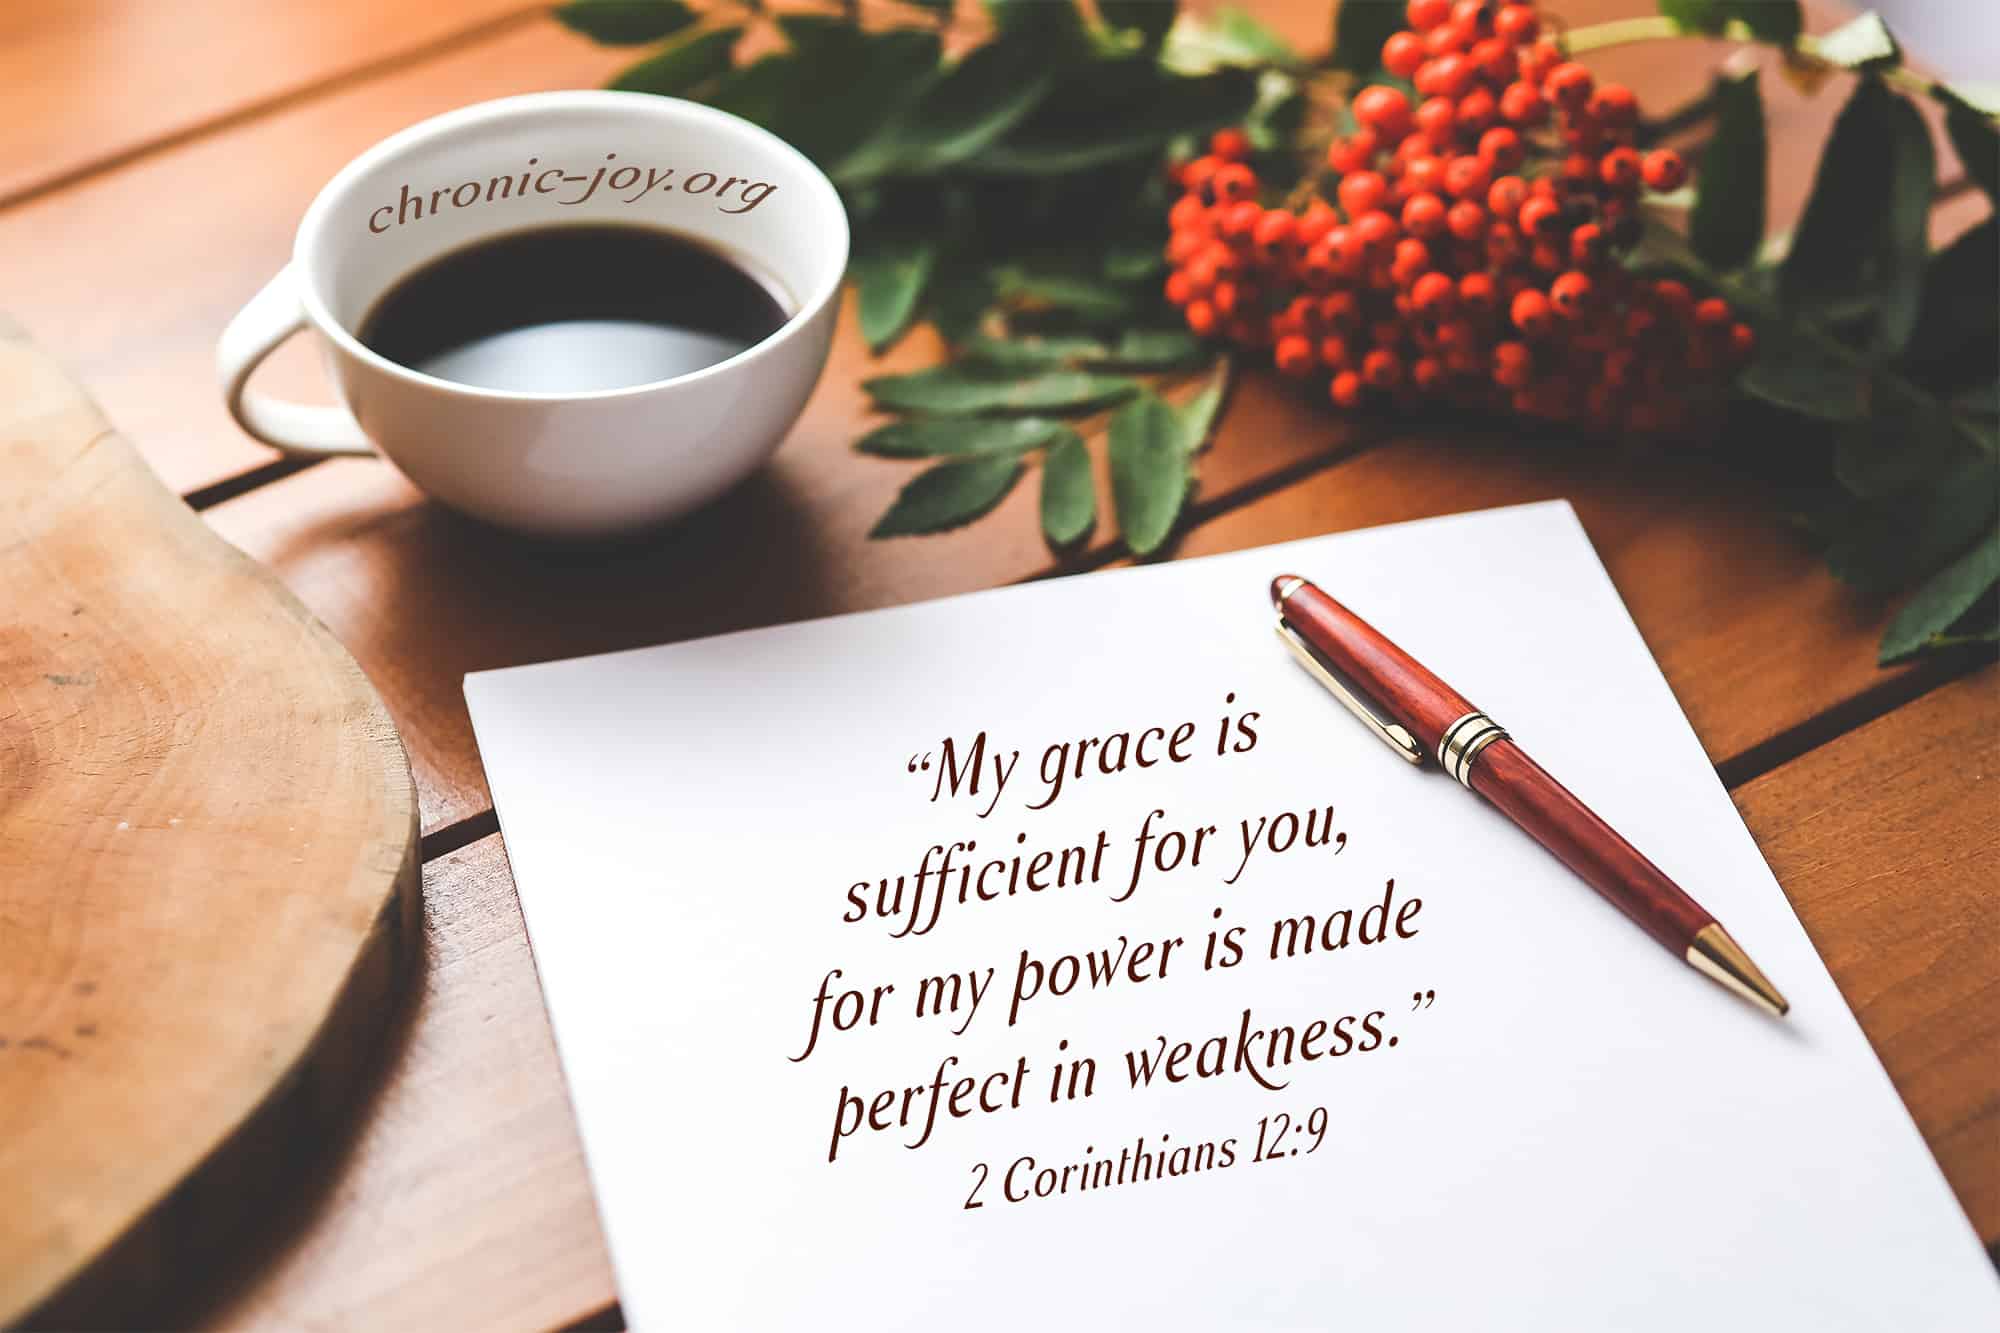 "My grace is sufficient for you, for my power is made perfect in weakness." 2 Corinthians 12:9